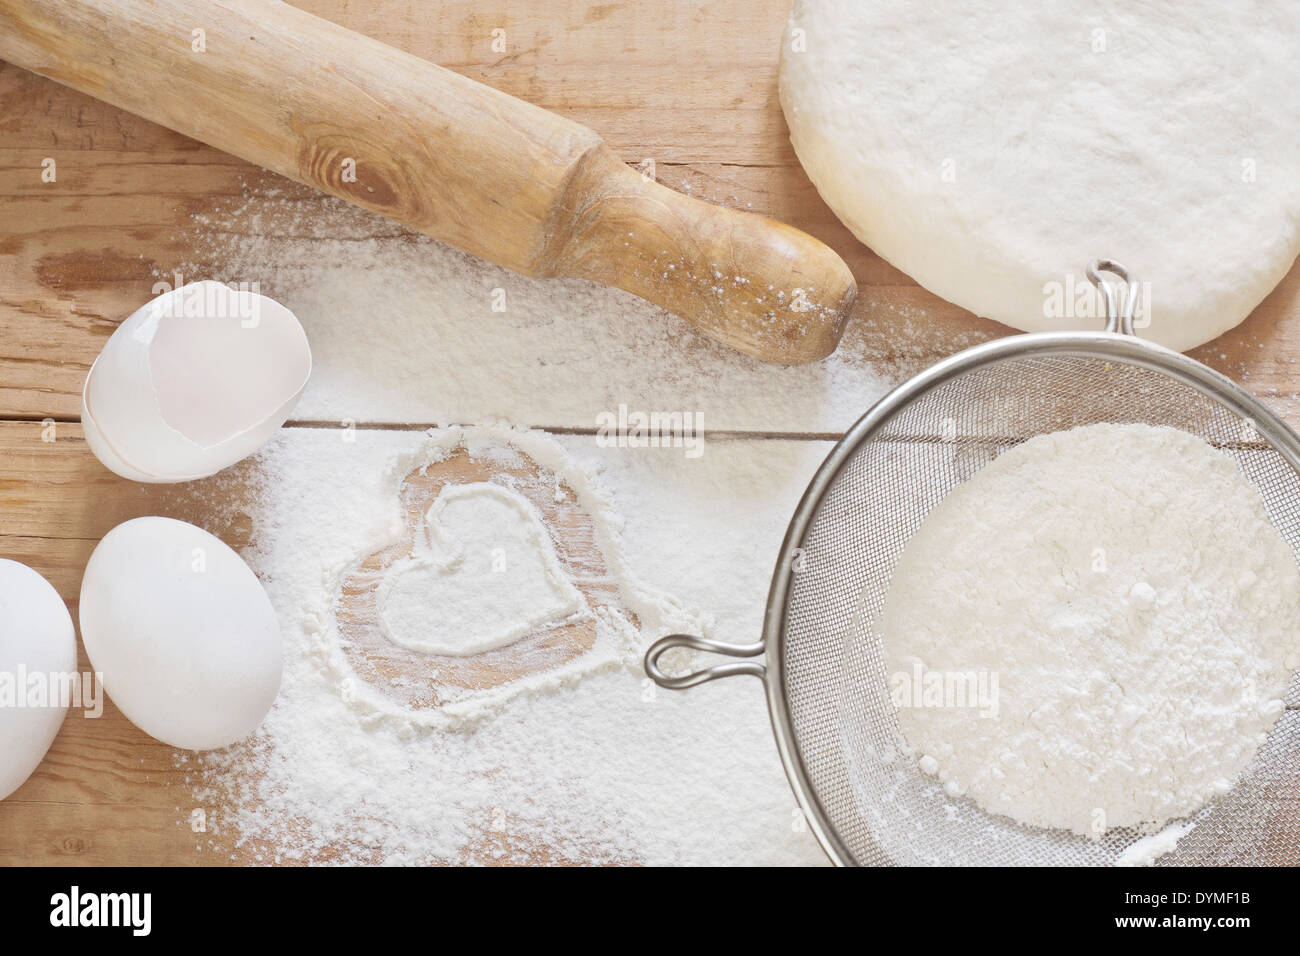 Flour, dough, eggs and rolling-pin on wooden table. Stock Photo